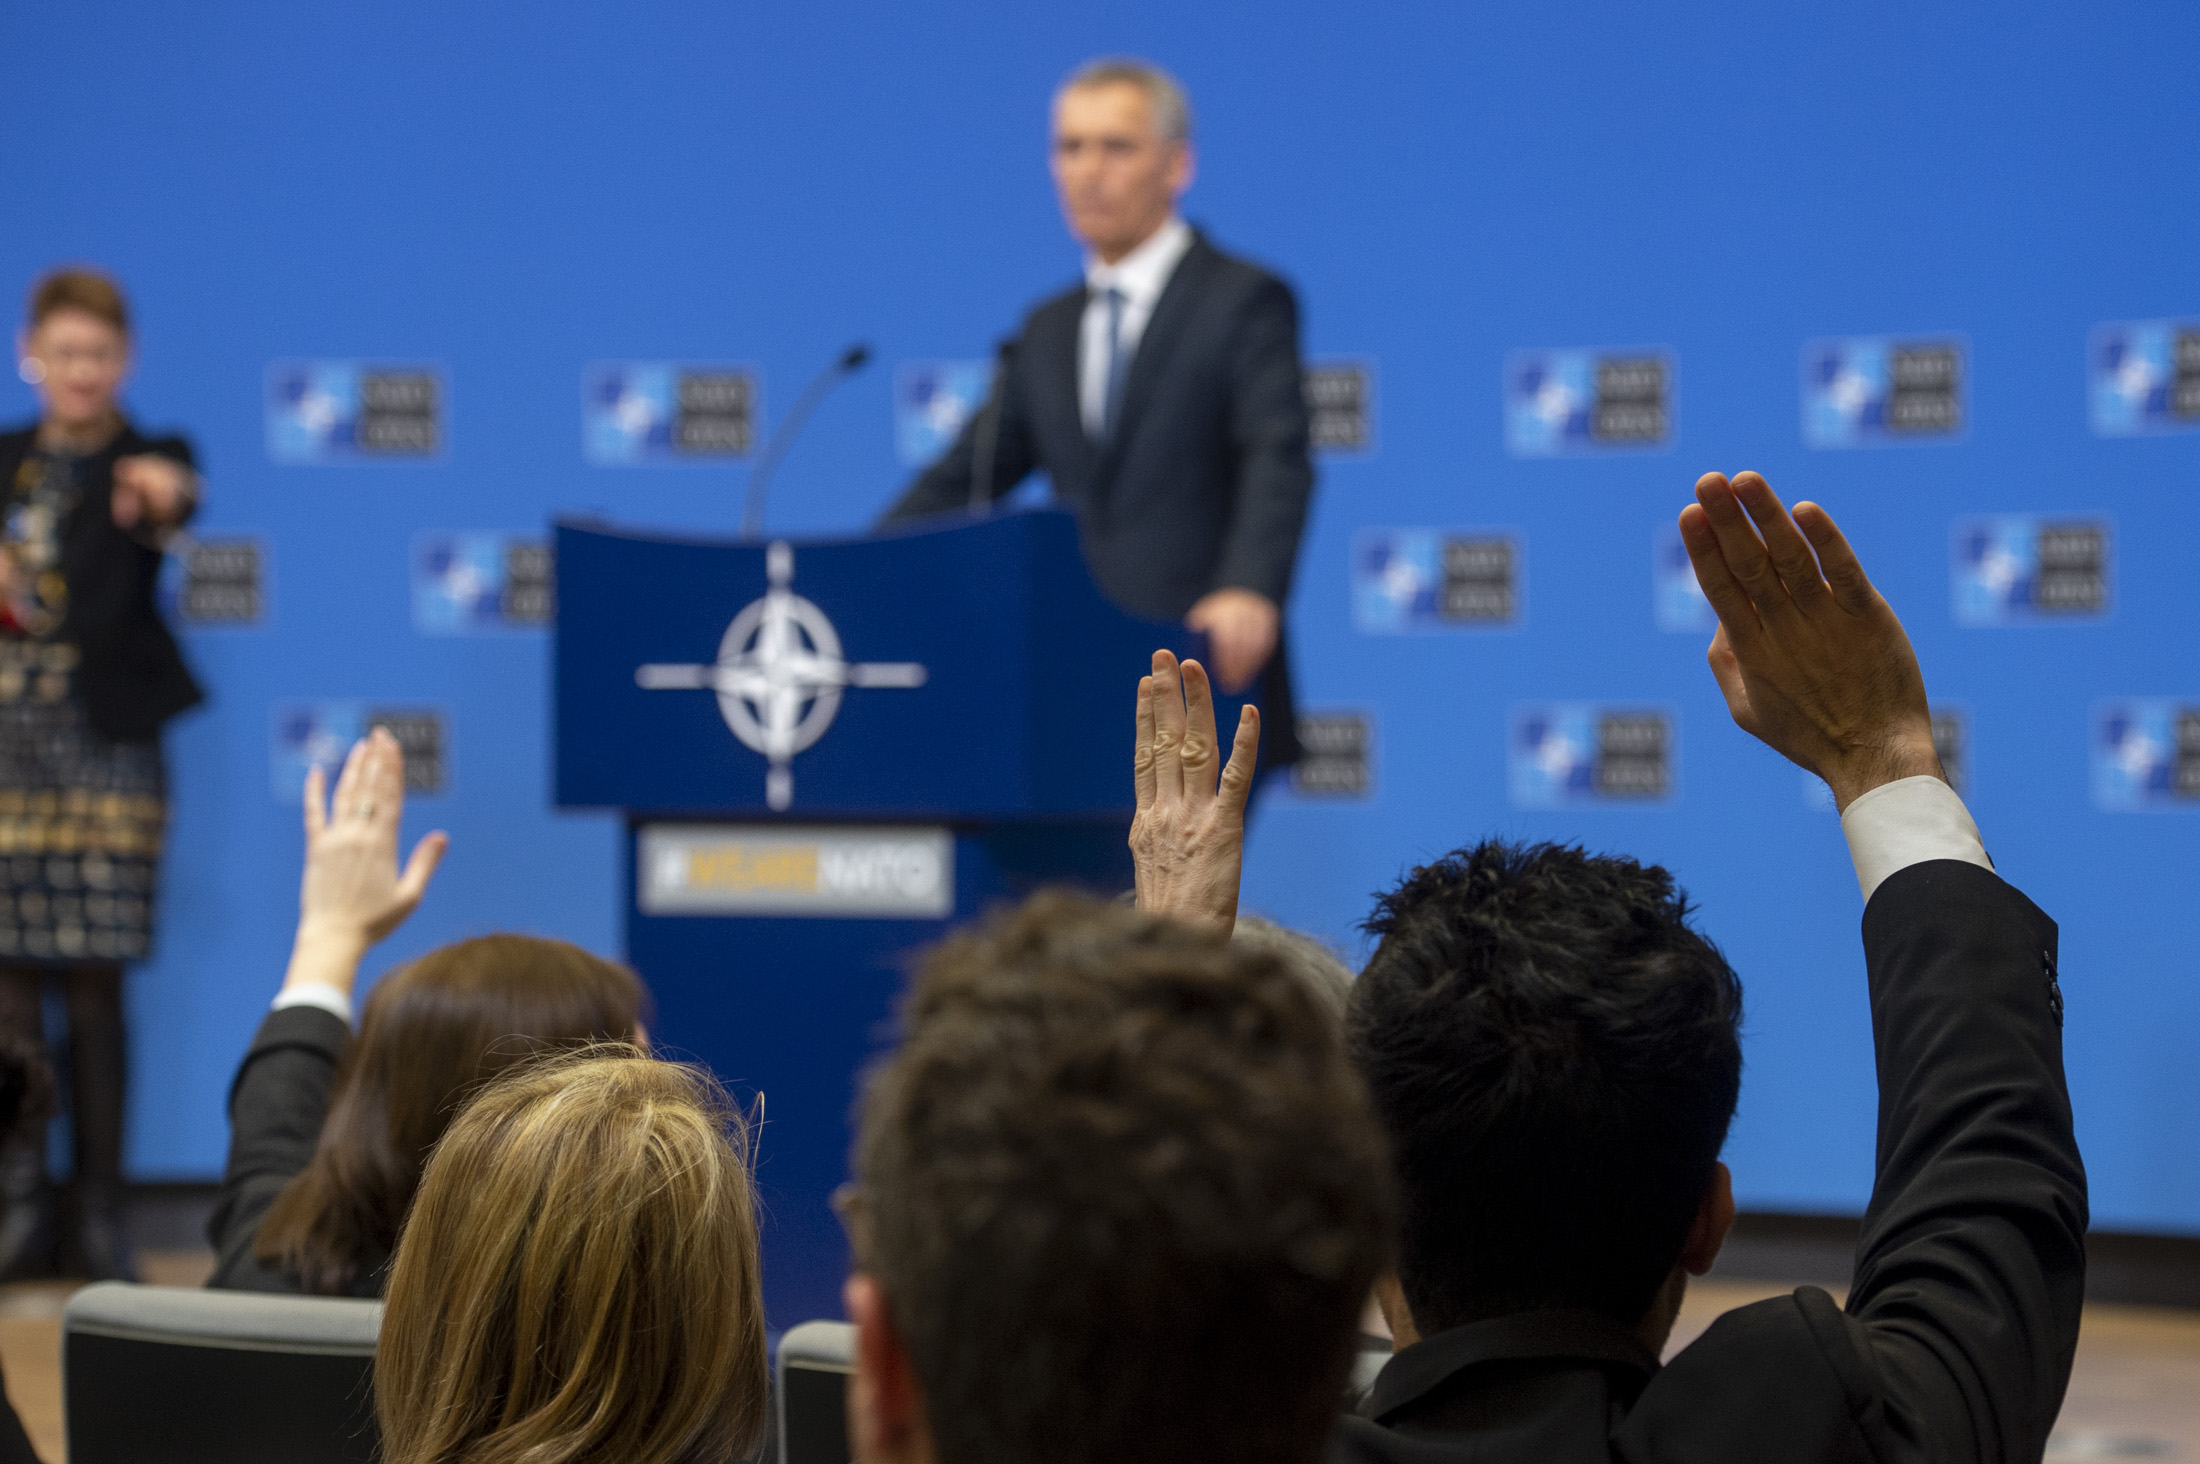 Press conference by NATO Secretary General Jens Stoltenberg ahead of the meetings of NATO Defence Ministers at NATO headquarters on 13 and 14 February 2019